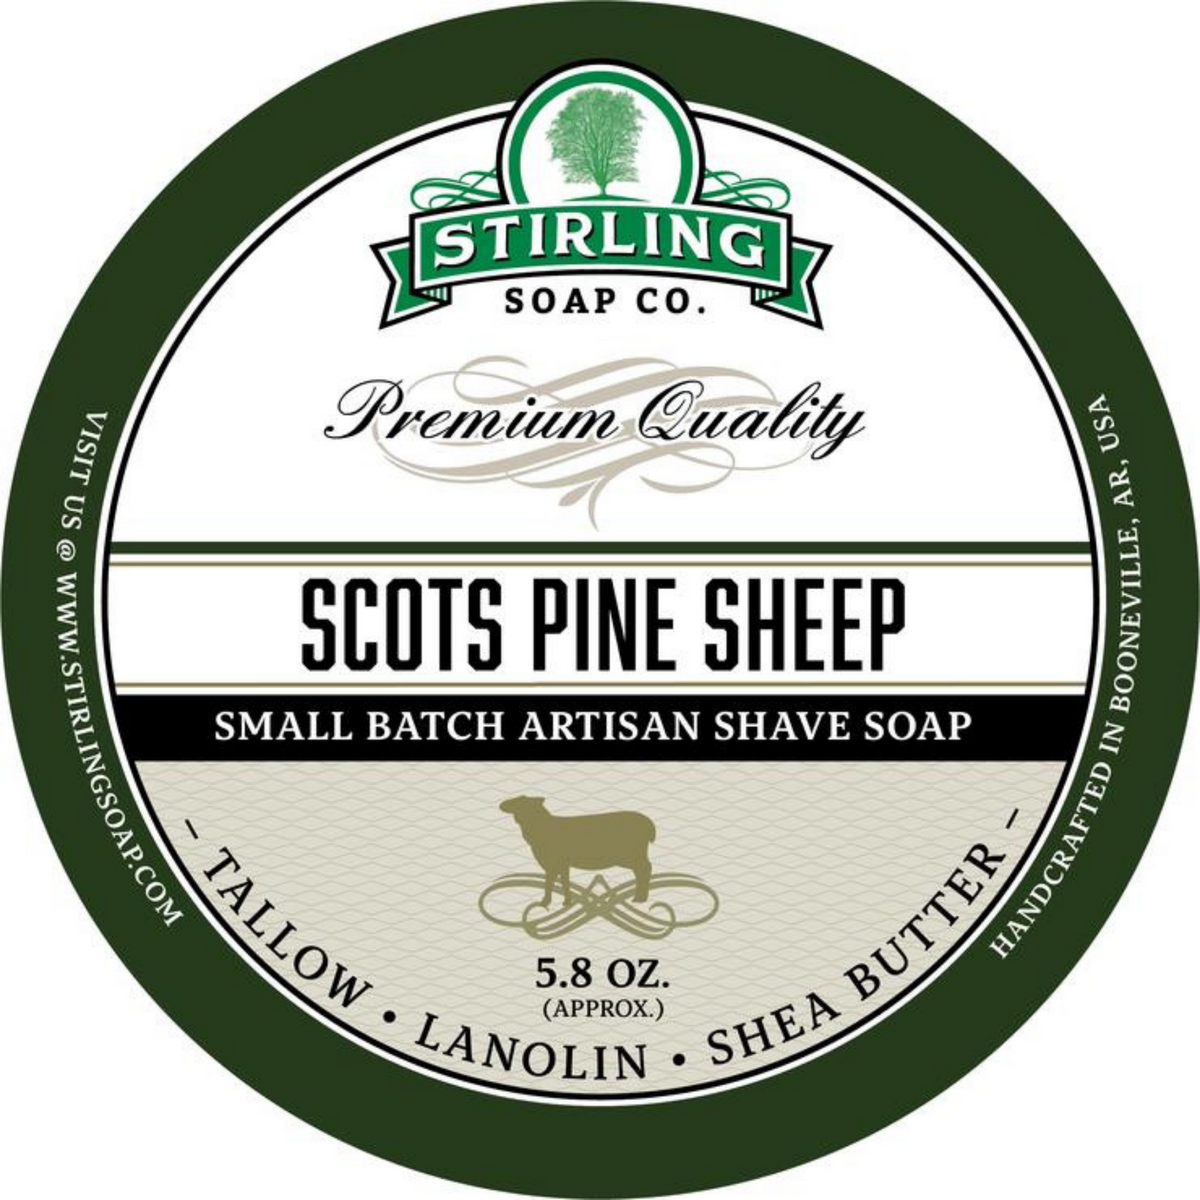 Primary Image of Scots Pine Sheep Tallow Shave Soap